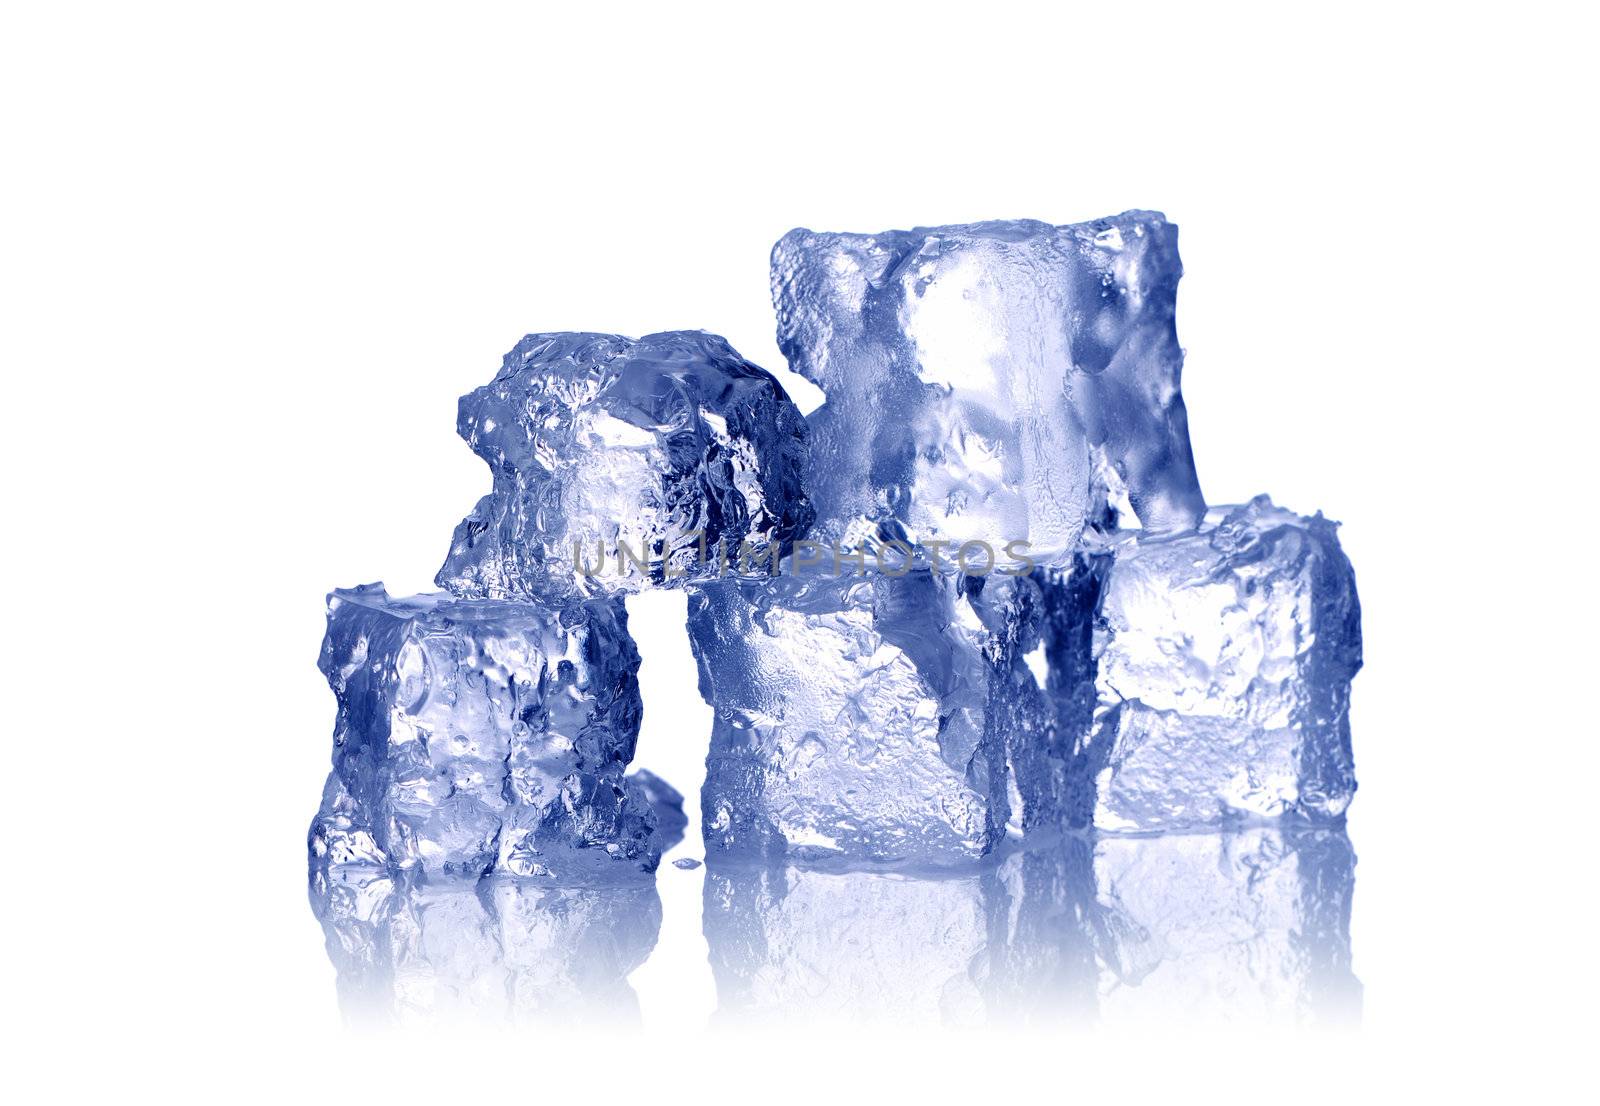 Ice cubes by haveseen